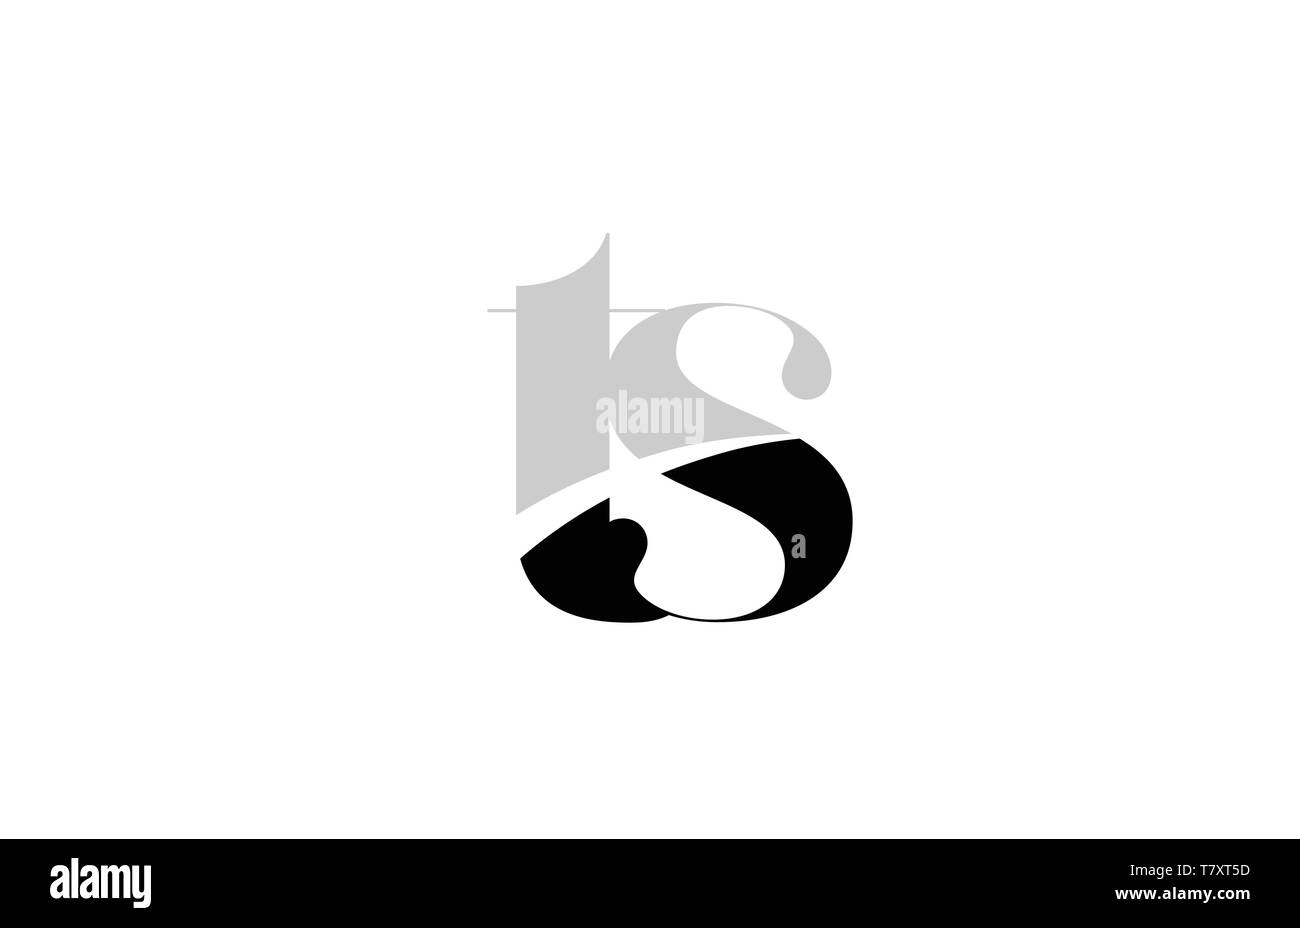 black and white alphabet letter ts t s logo icon design for a company or business Stock Vector